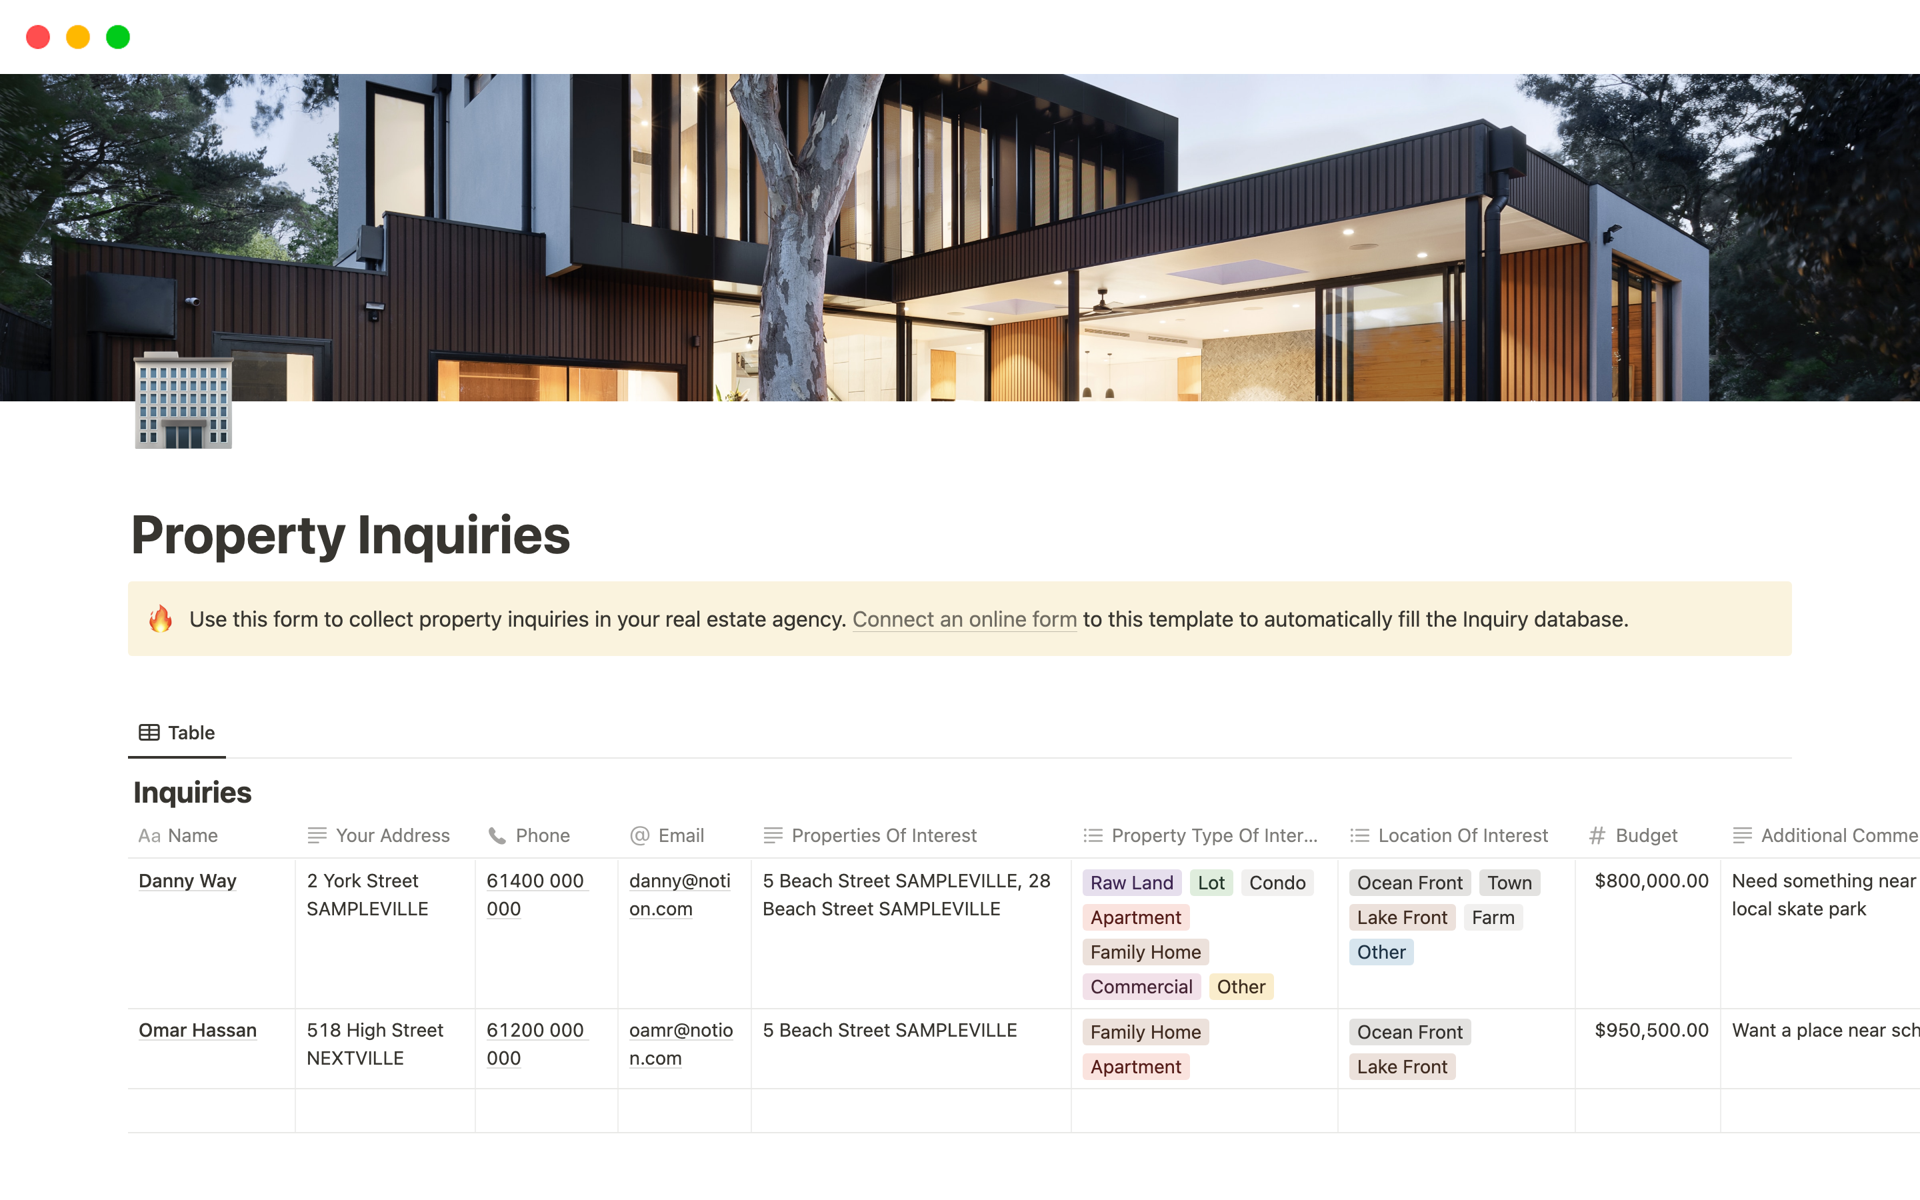 Use this Notion Property Inquiries template, connected to an online form, to have real estate property inquiries auto-updated in Notion.